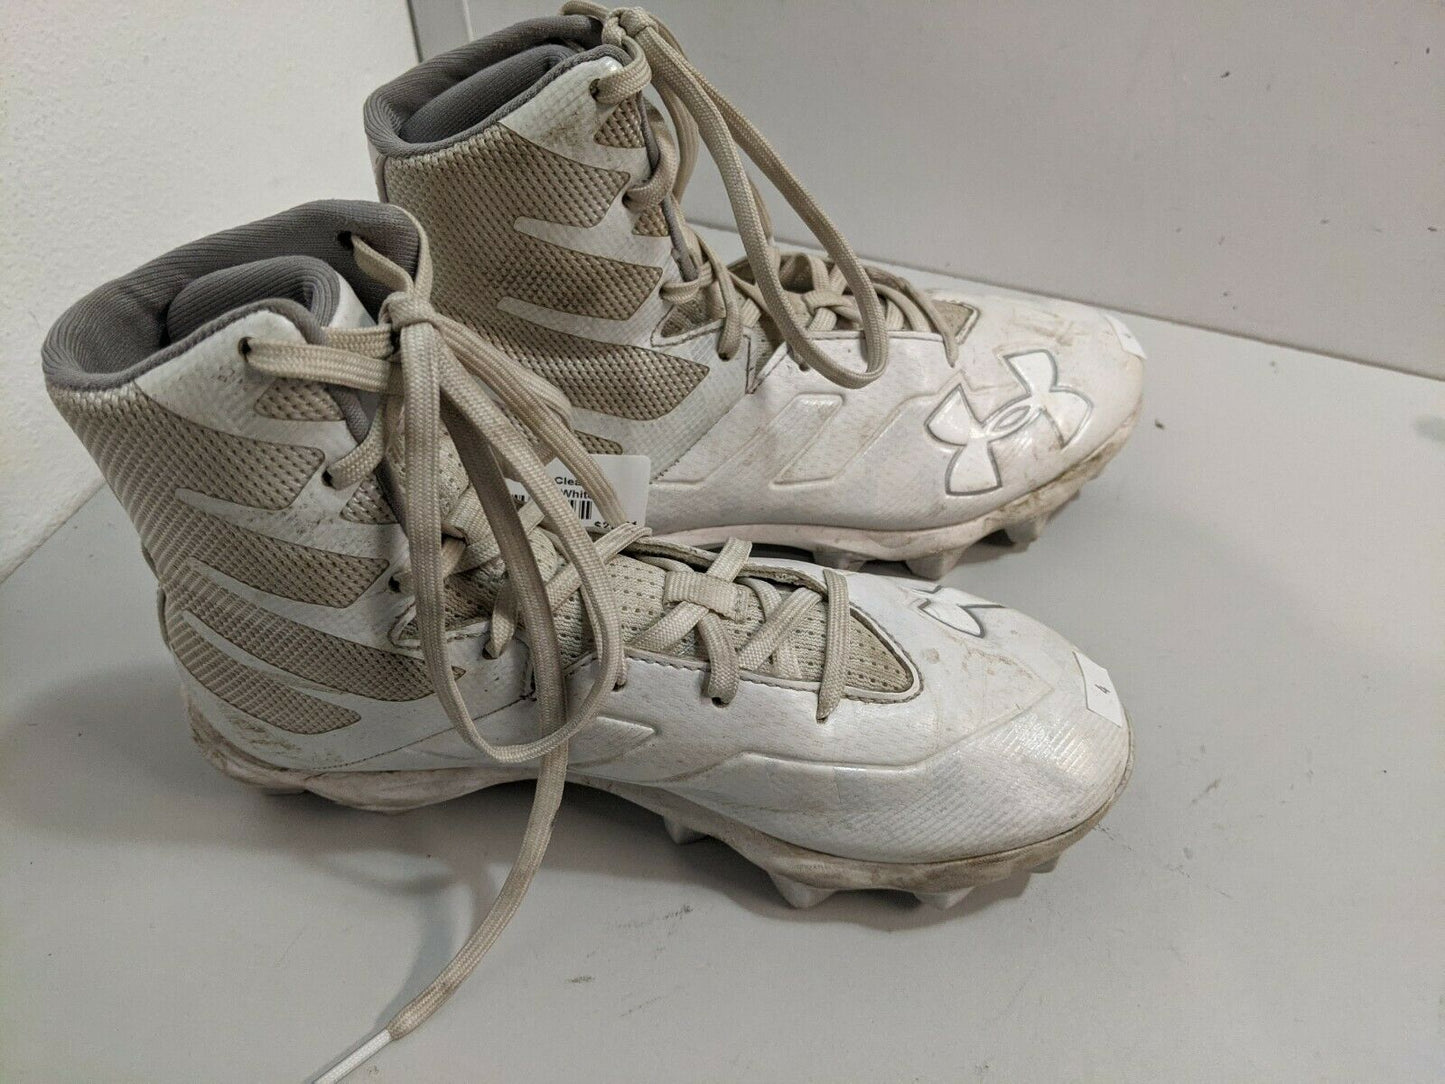 Under Armor Highlight Cleats Size 4 Color White